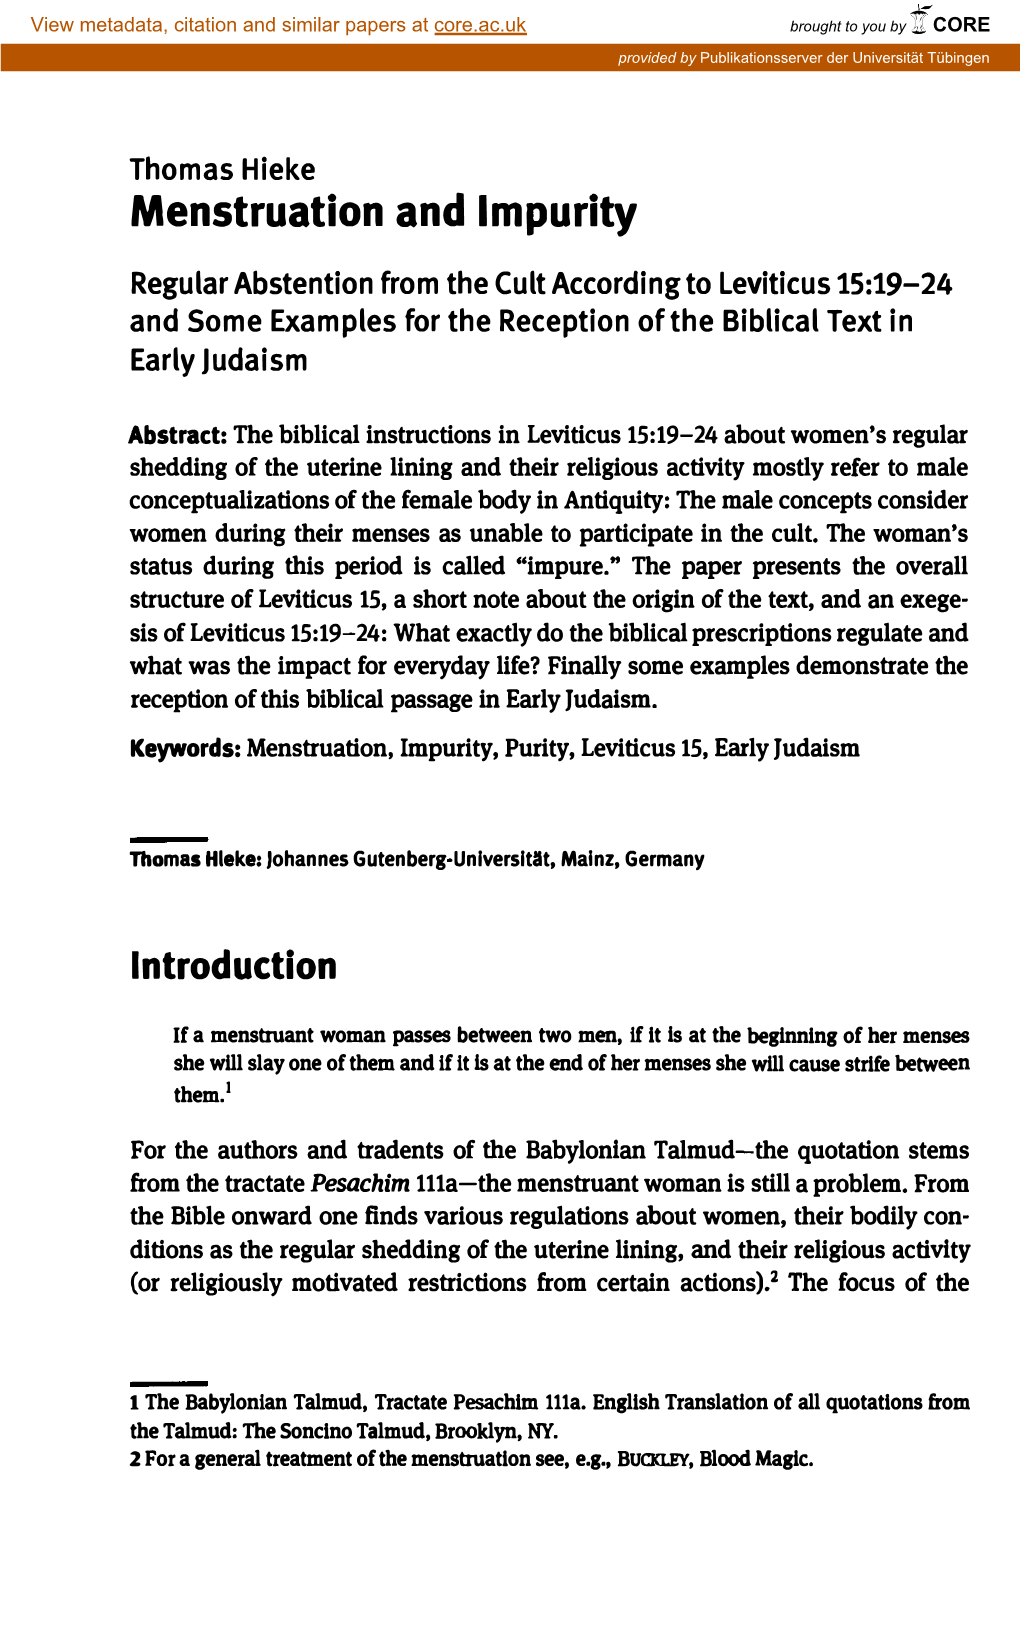 Menstruation and Lmpurity Regular Abstention from the Cult According to Leviticus 15:19-24 and Some Examples for the Reception of the Biblical Text in Early Judaism